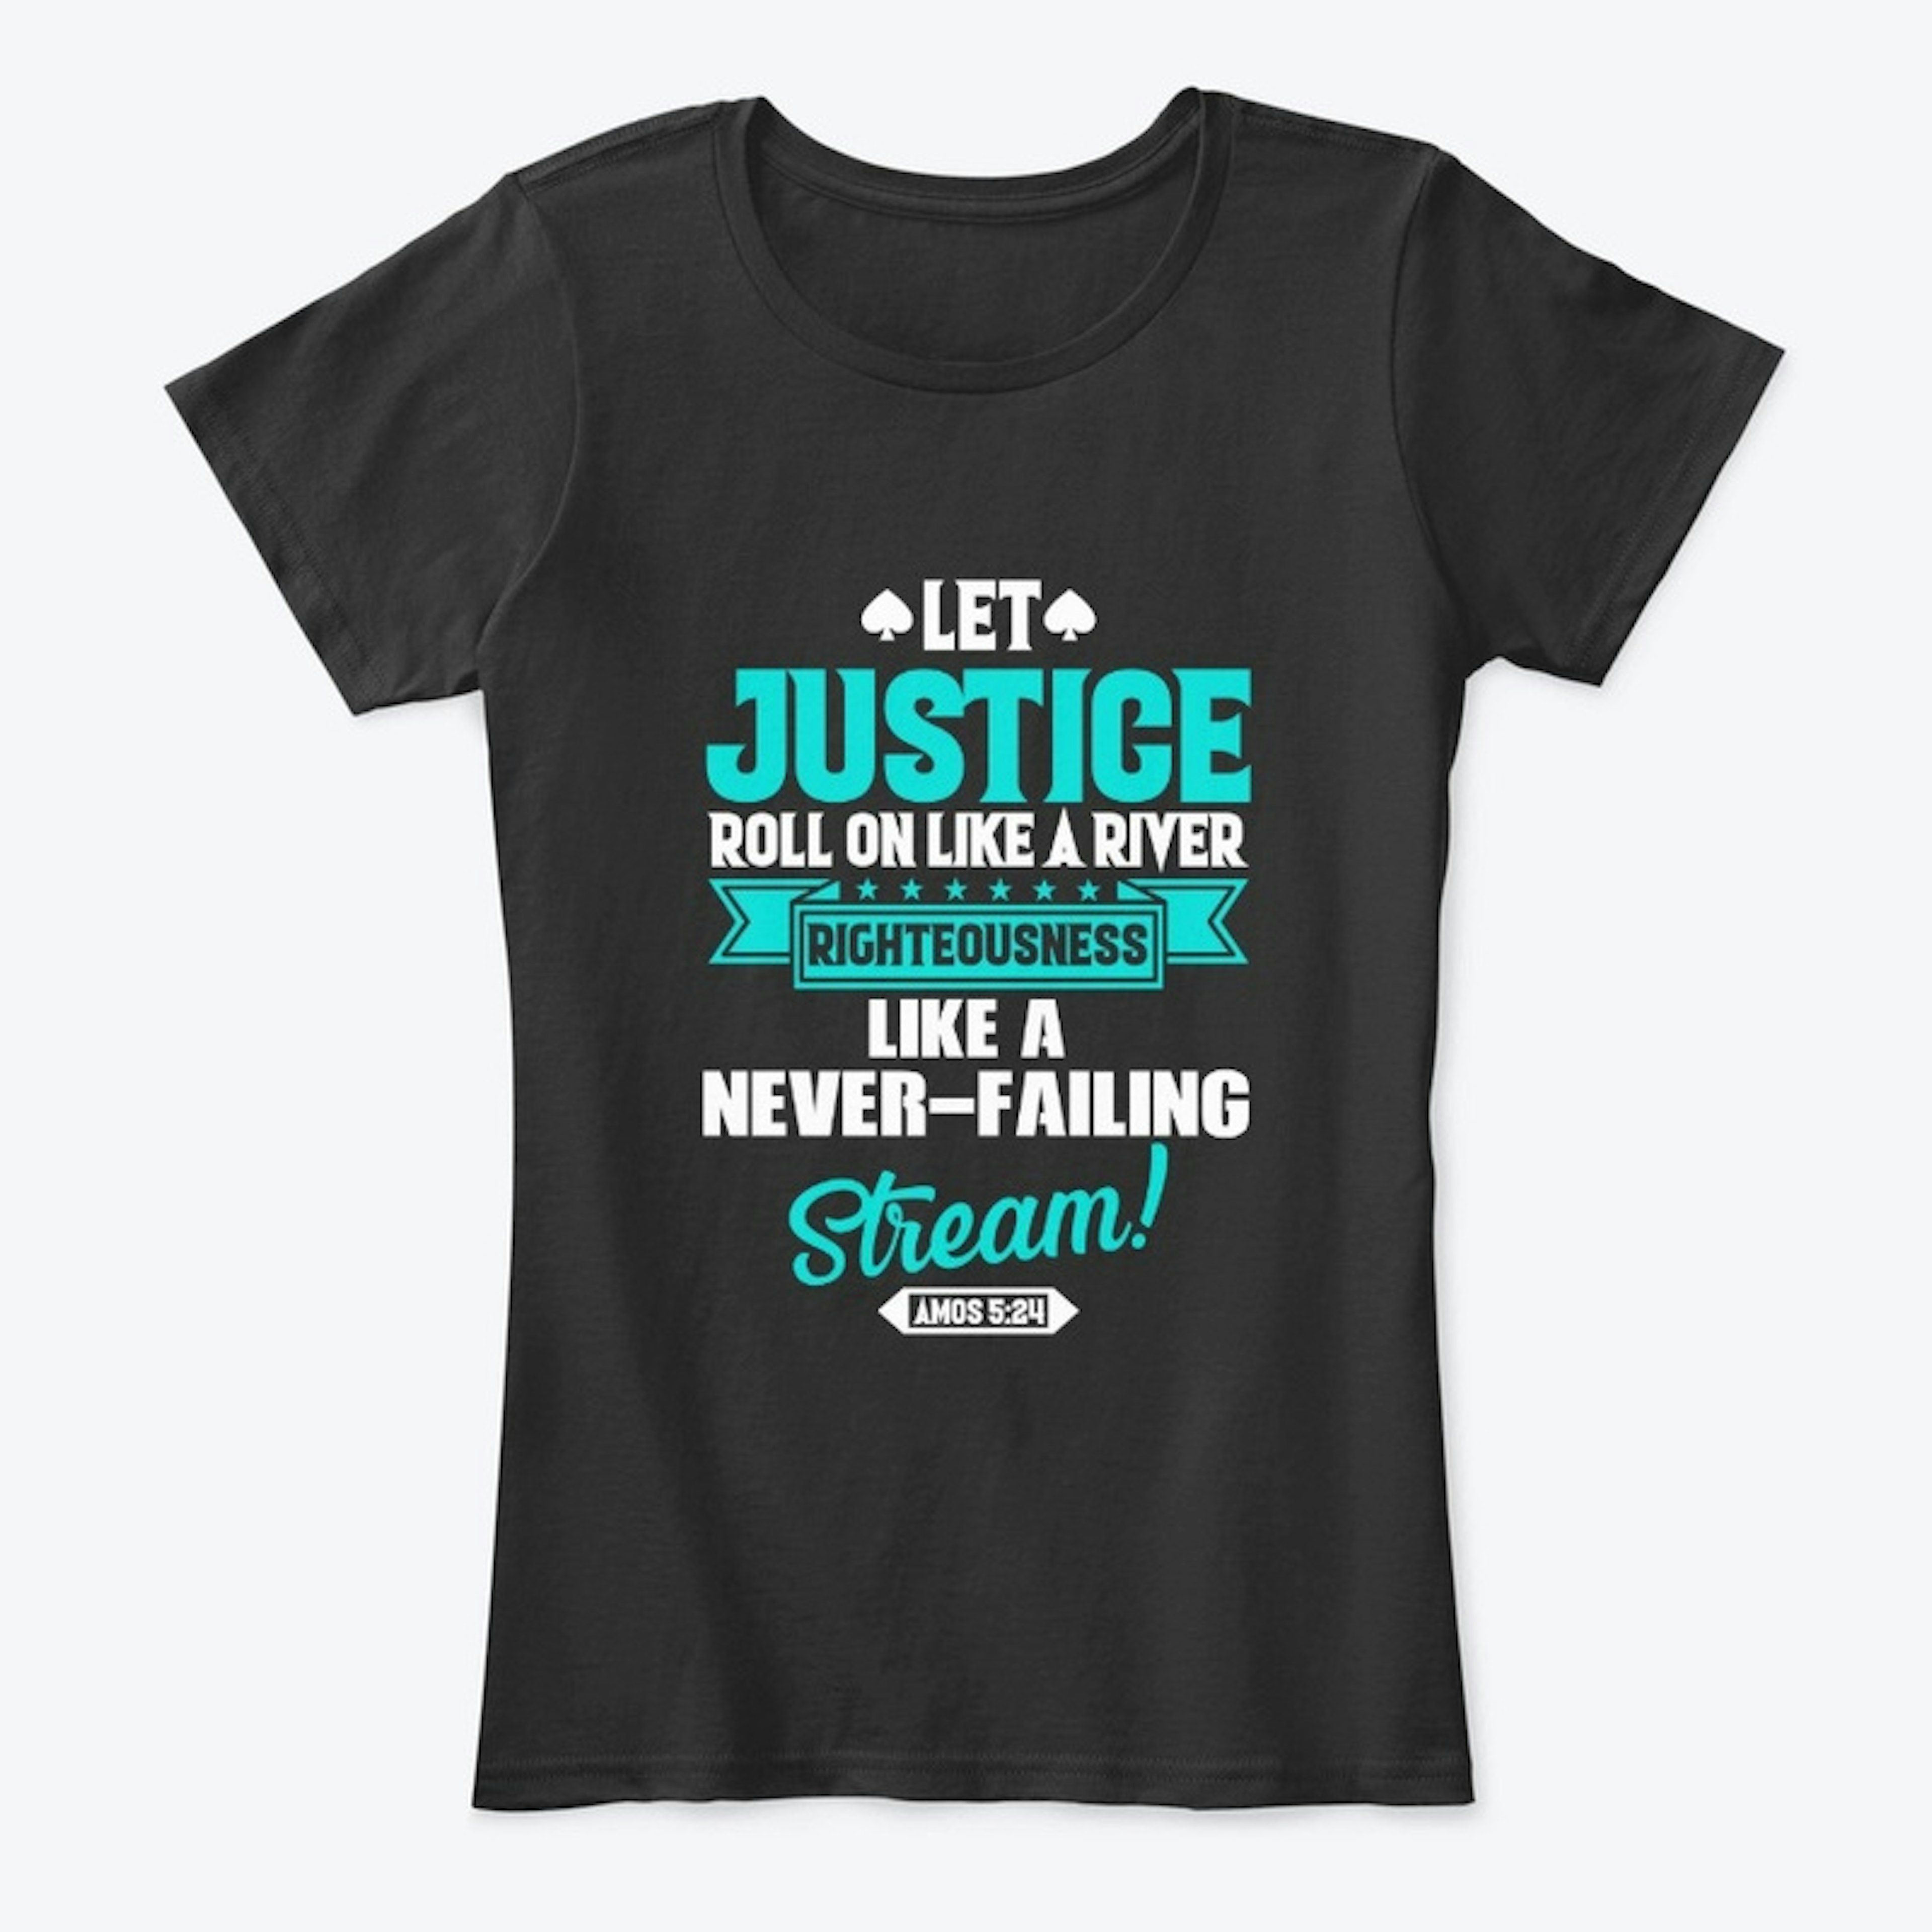 Christian Tees about justice